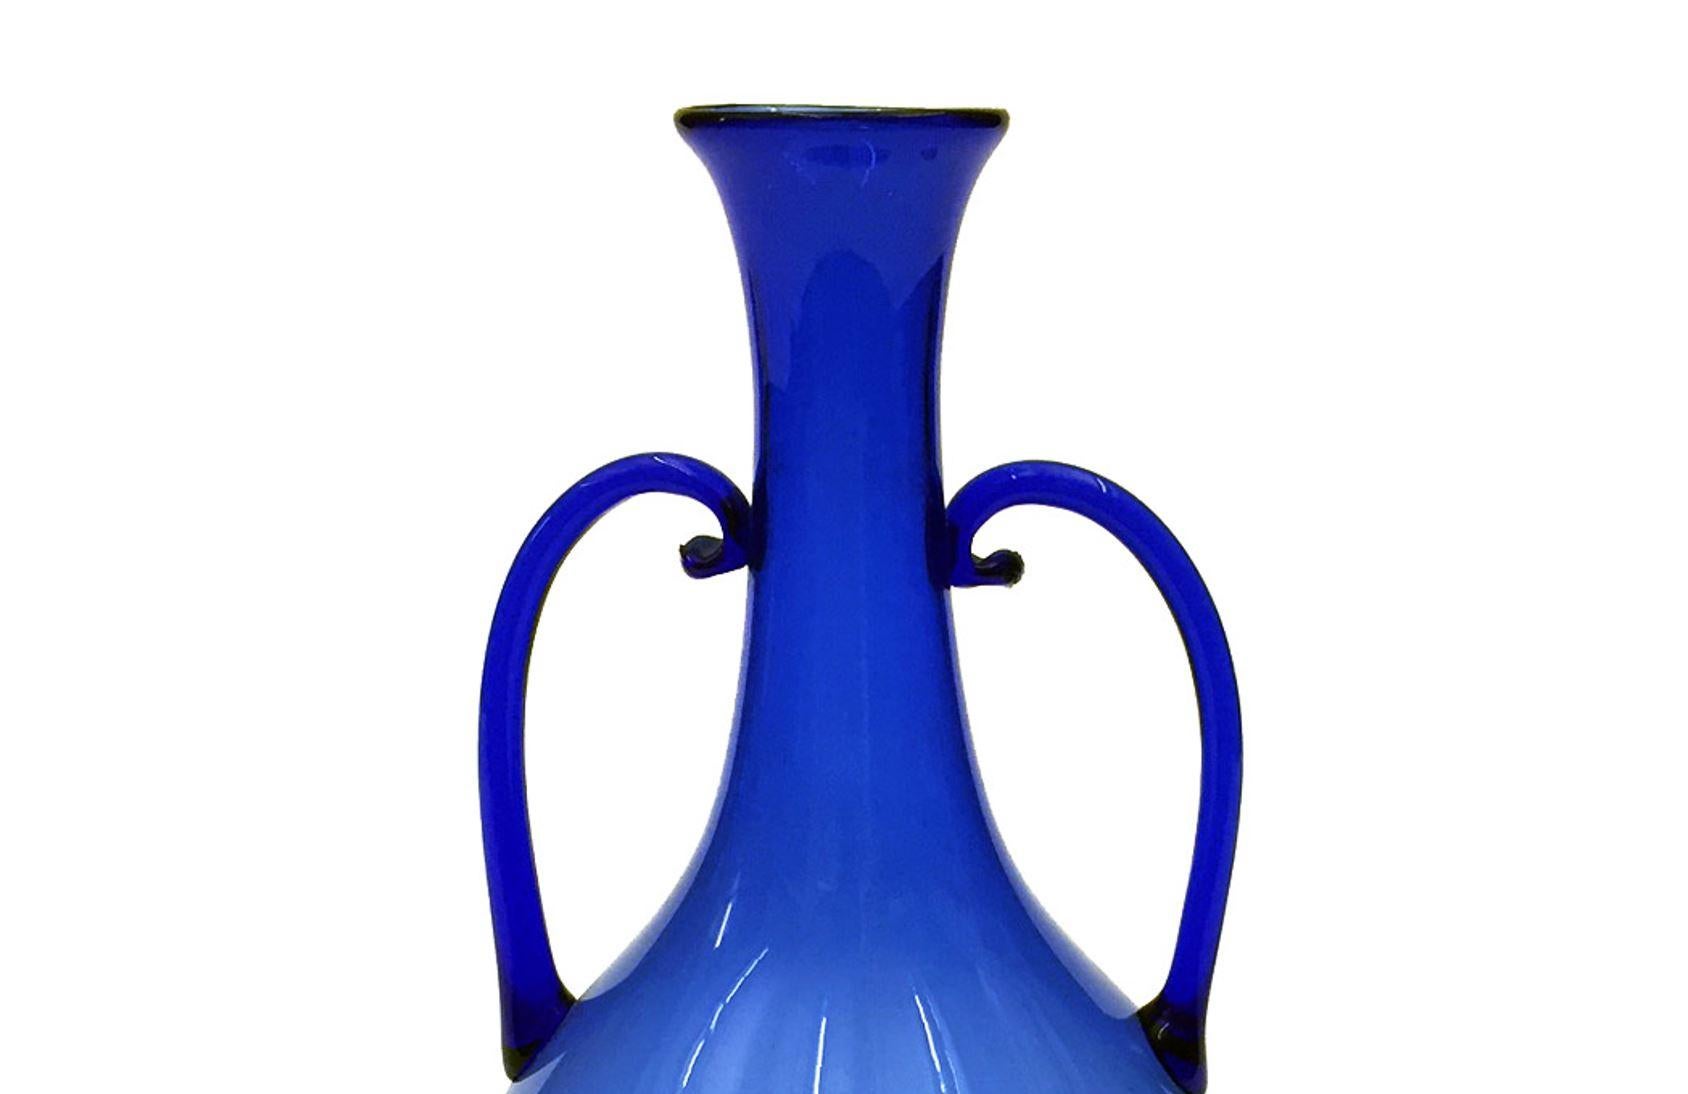 Venini blue vase with two blue thin handles.

Property from esteemed interior designer Juan Montoya. Juan Montoya is one of the most acclaimed and prolific interior designers in the world today. Juan Montoya was born and spent his early years in